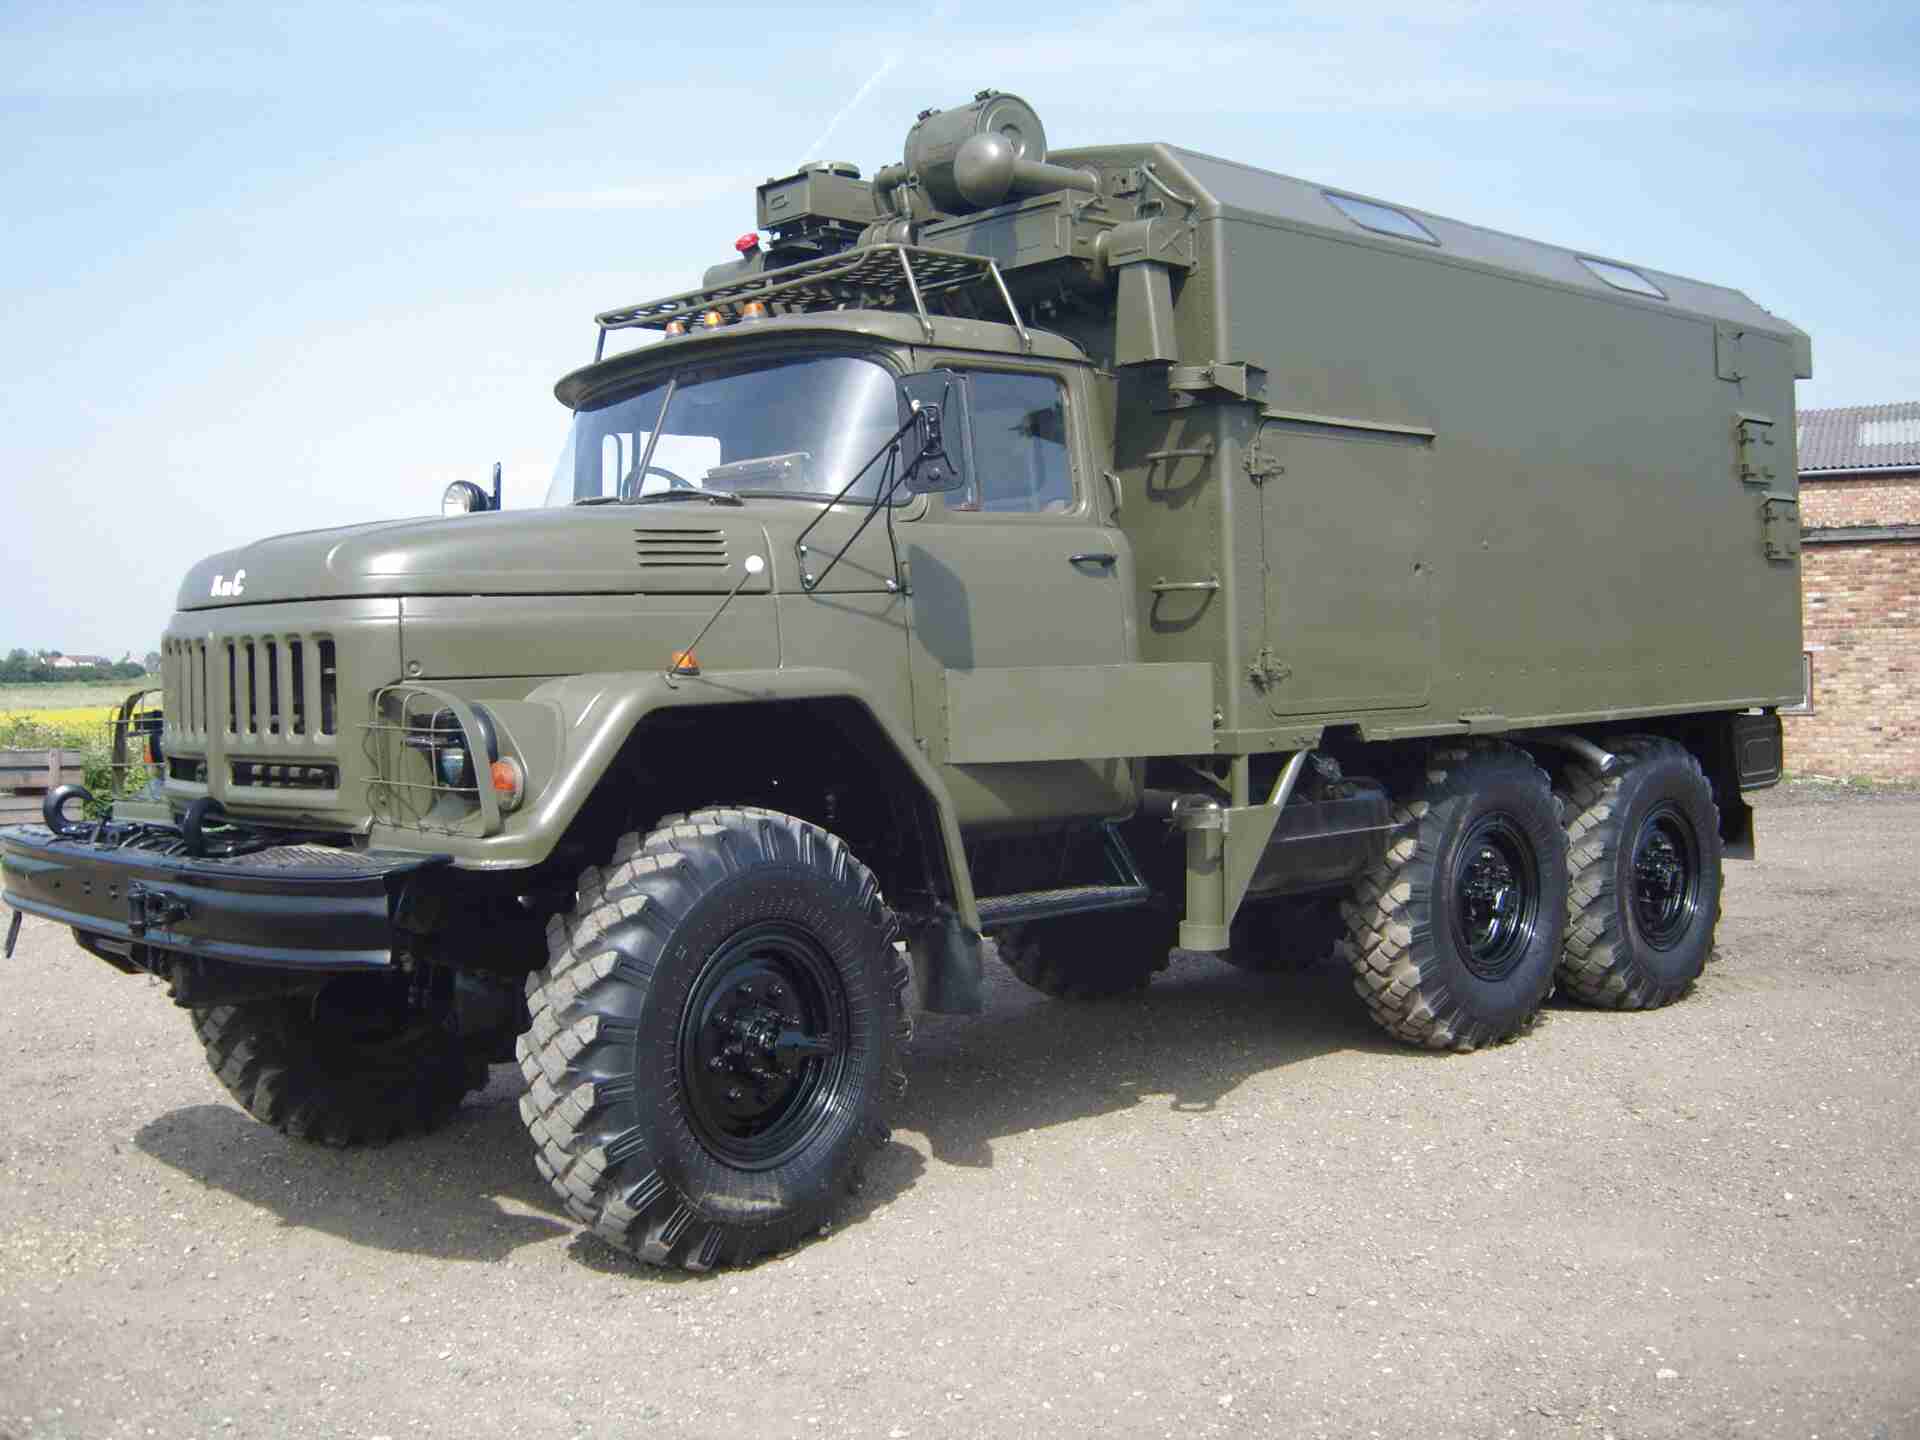 Russian Military Trucks for sale in UK 53 used Russian Military Trucks